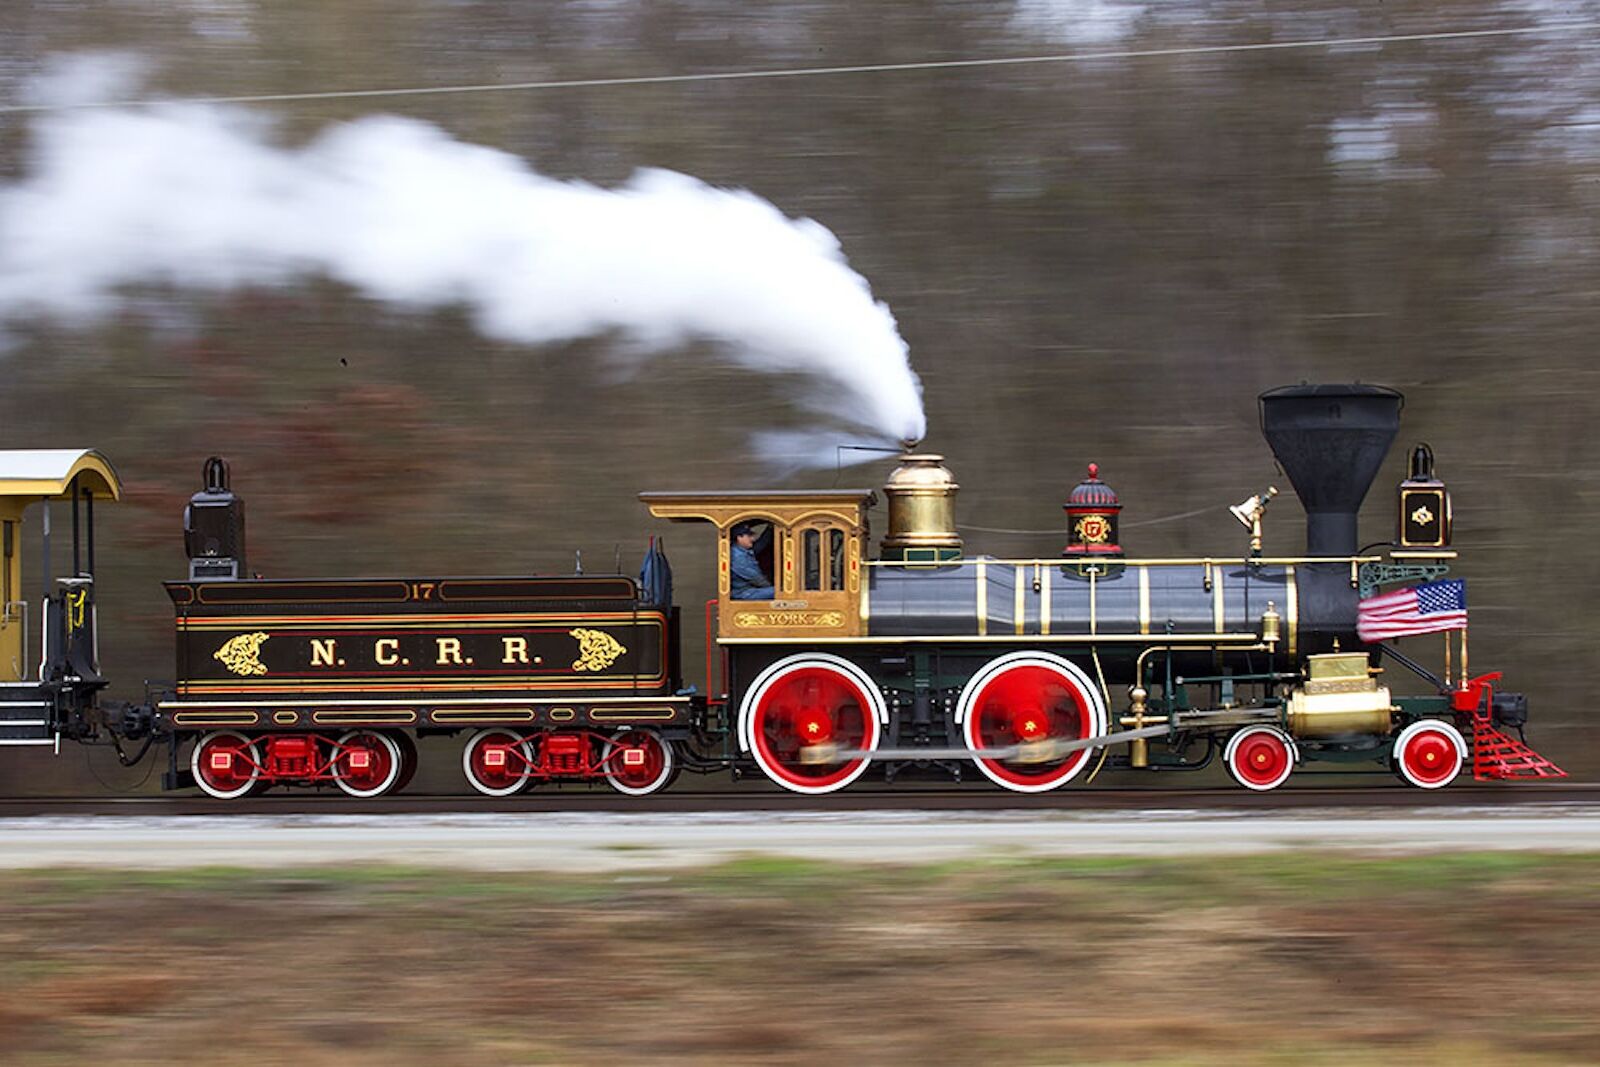 Steam locomotive from the Northern Central Railway of York in Pennsylvania.